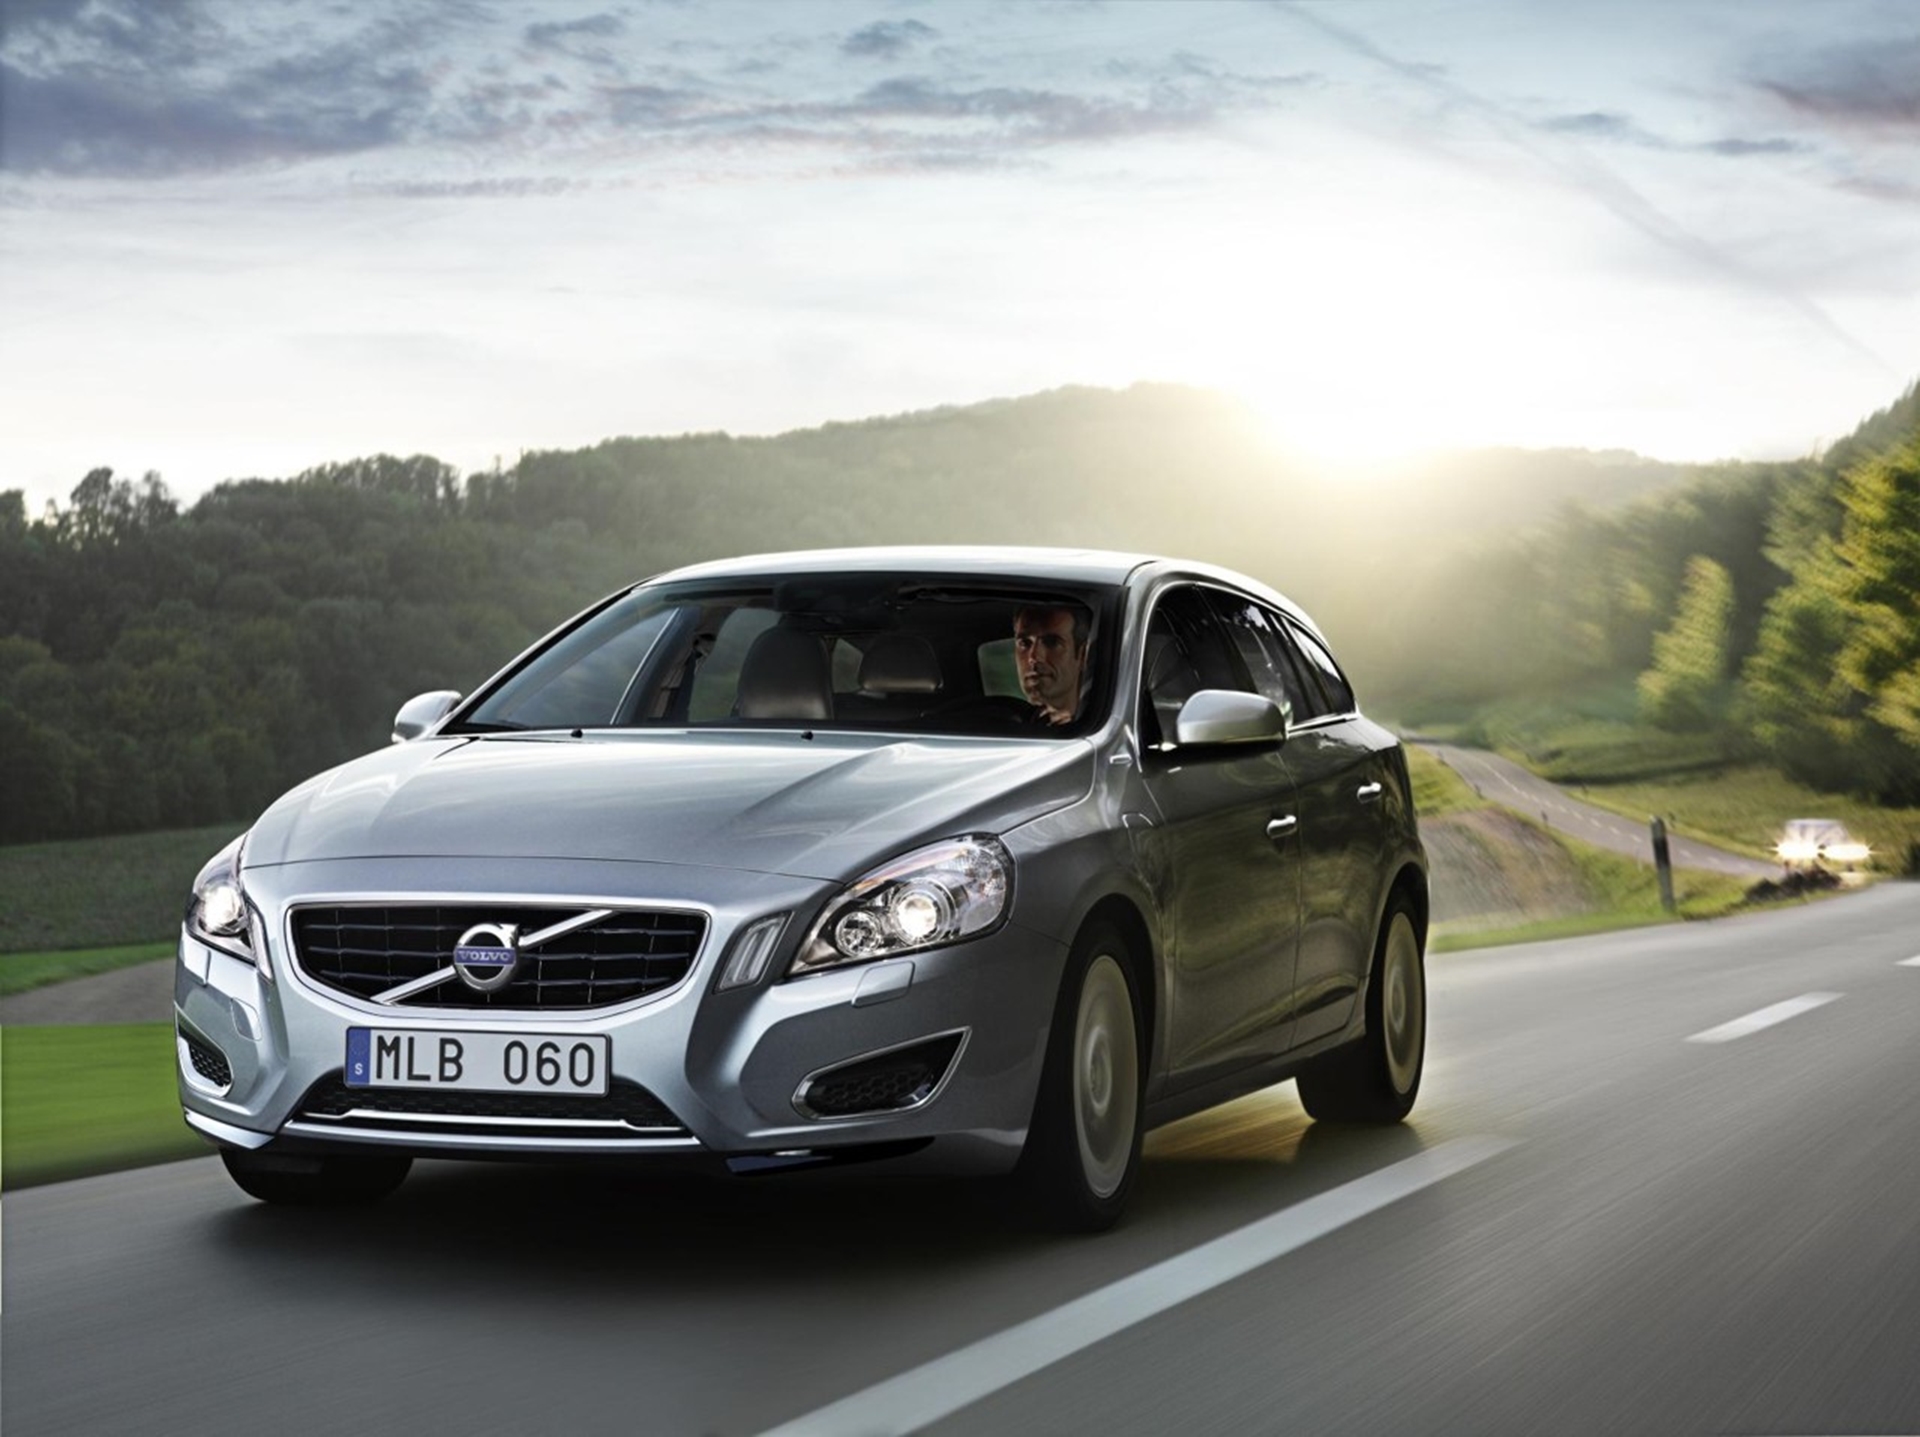 VOLVO PRESENTS THE ALL-NEW V40 AND THE WORLD’S FIRST PLUG-IN DIESEL HYBRID V60 FOR THE FIRST TIME IN THE UK